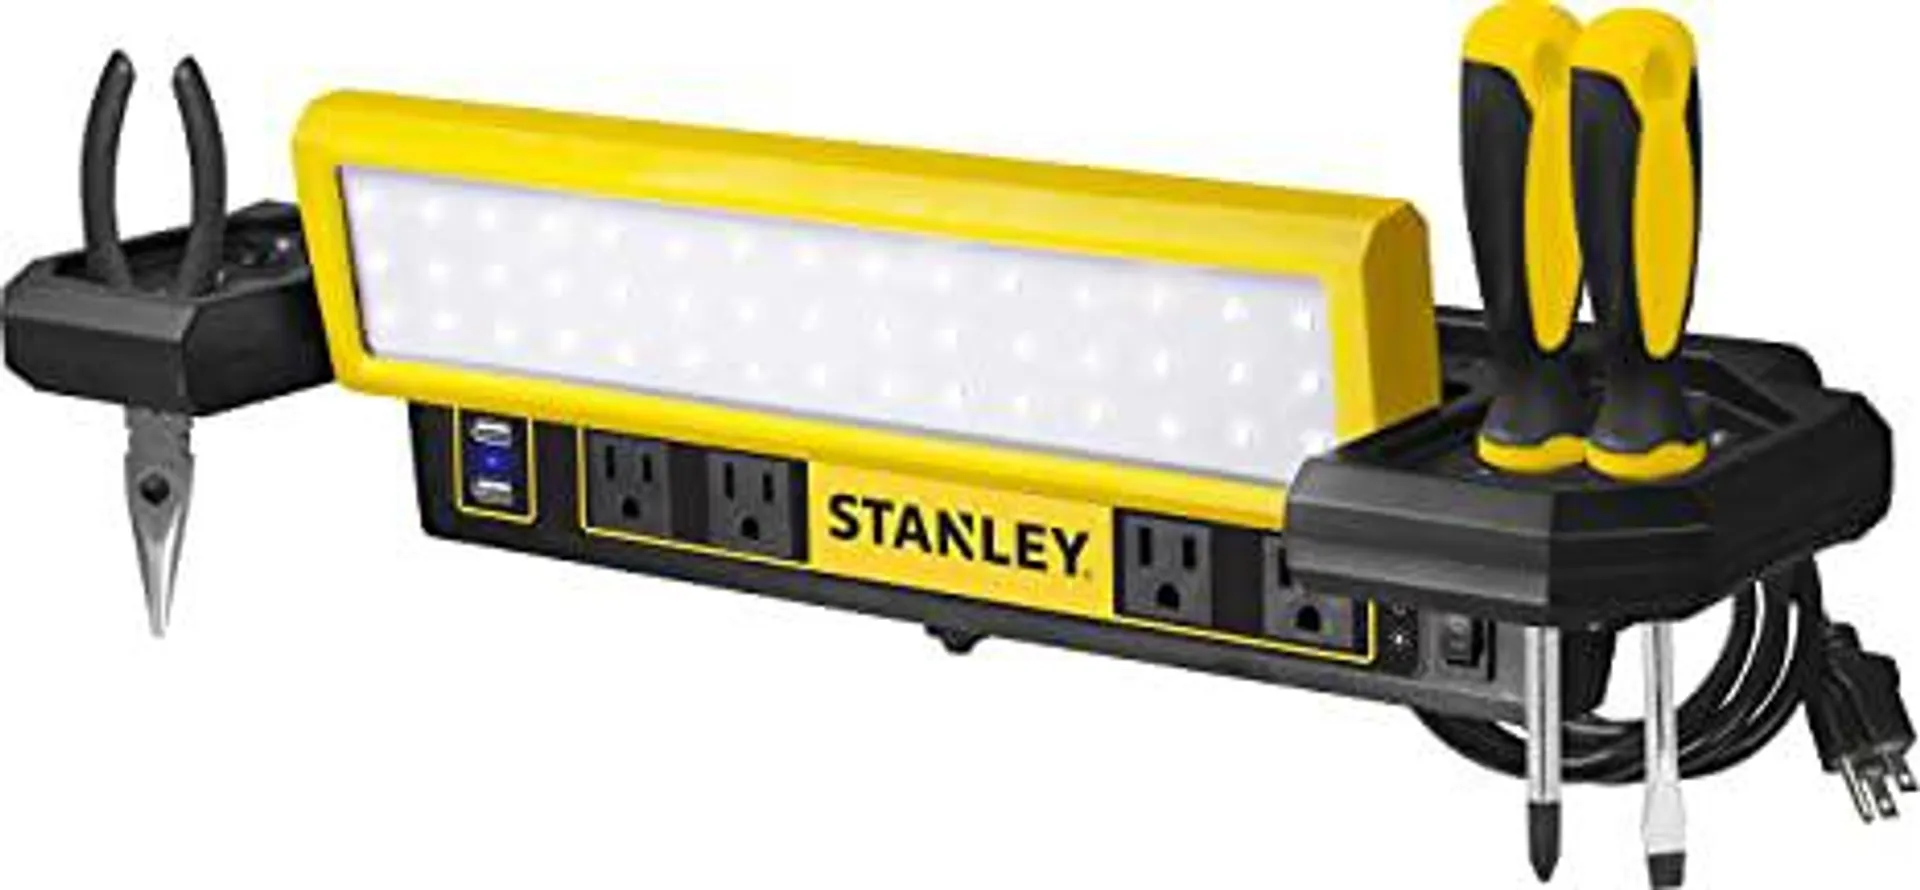 STANLEY PSL1000S Adjustable 45 COB LED Workbench Light with AC Power Outlets, Dual 2.1 Amp USB Charging Ports, and Tool Storage